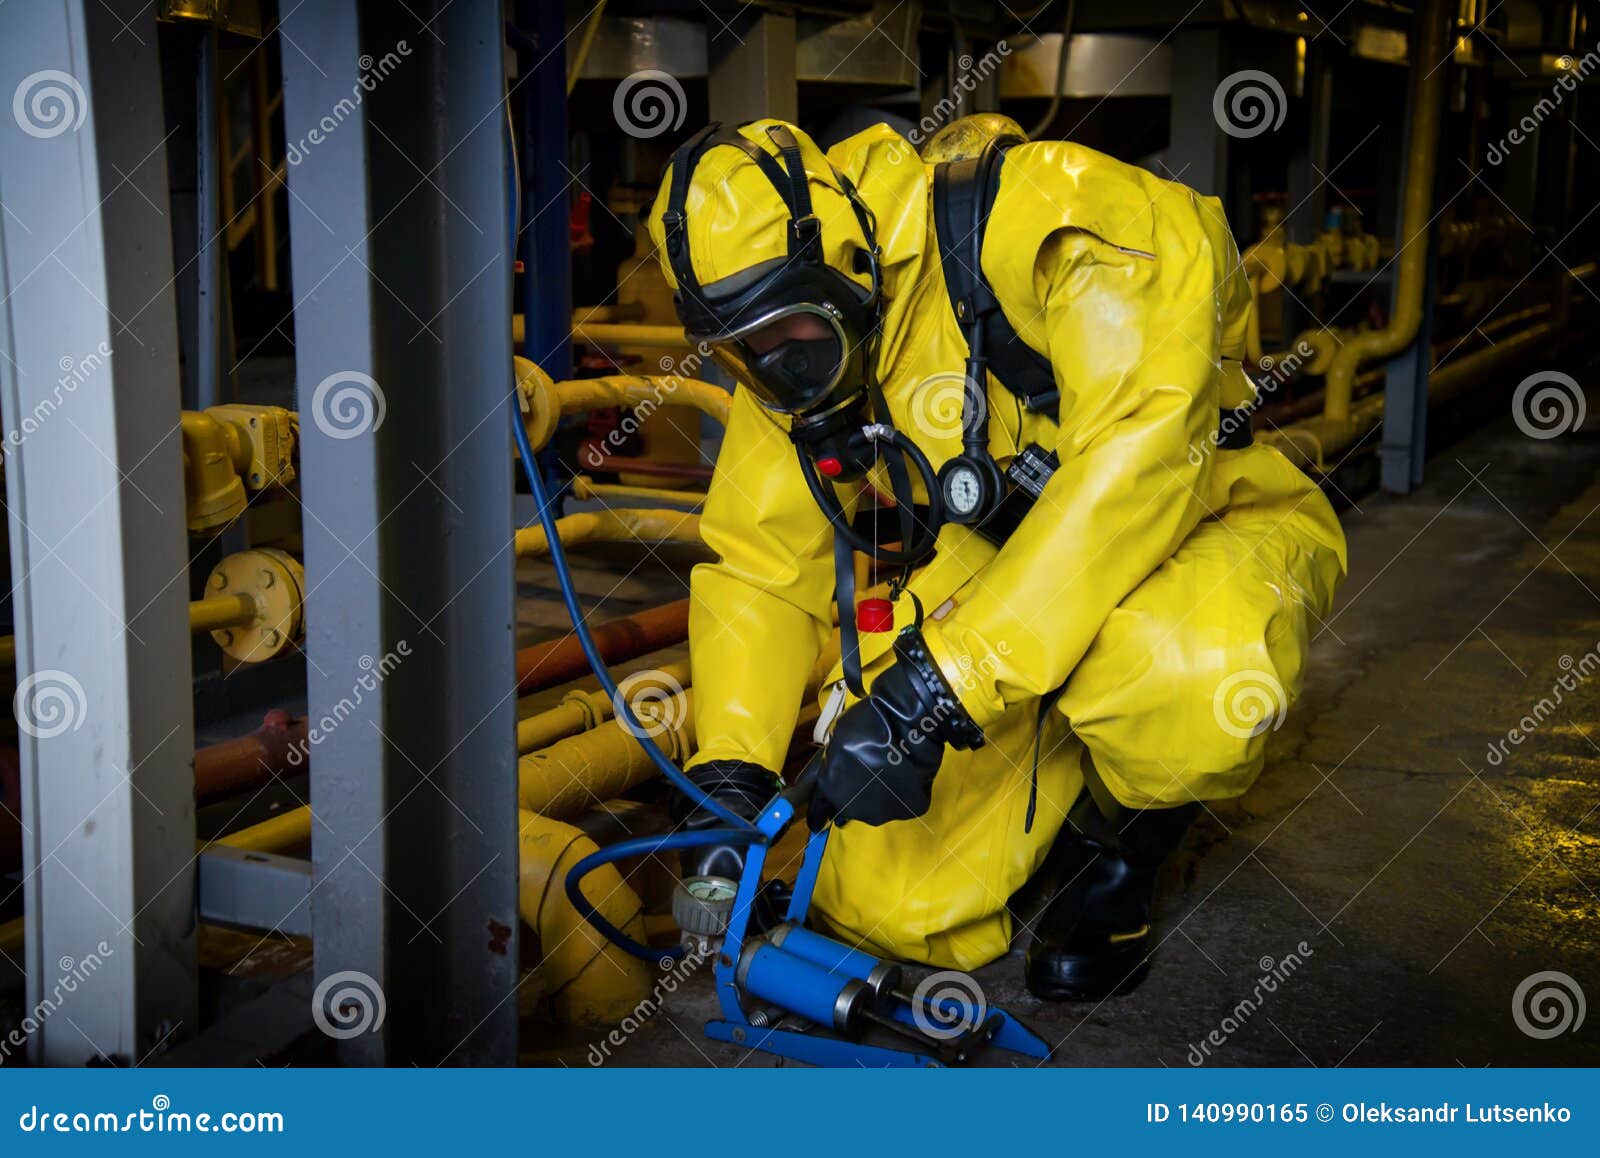 man in a anti-radiation hazmat suit and gasmask in | Stable Diffusion